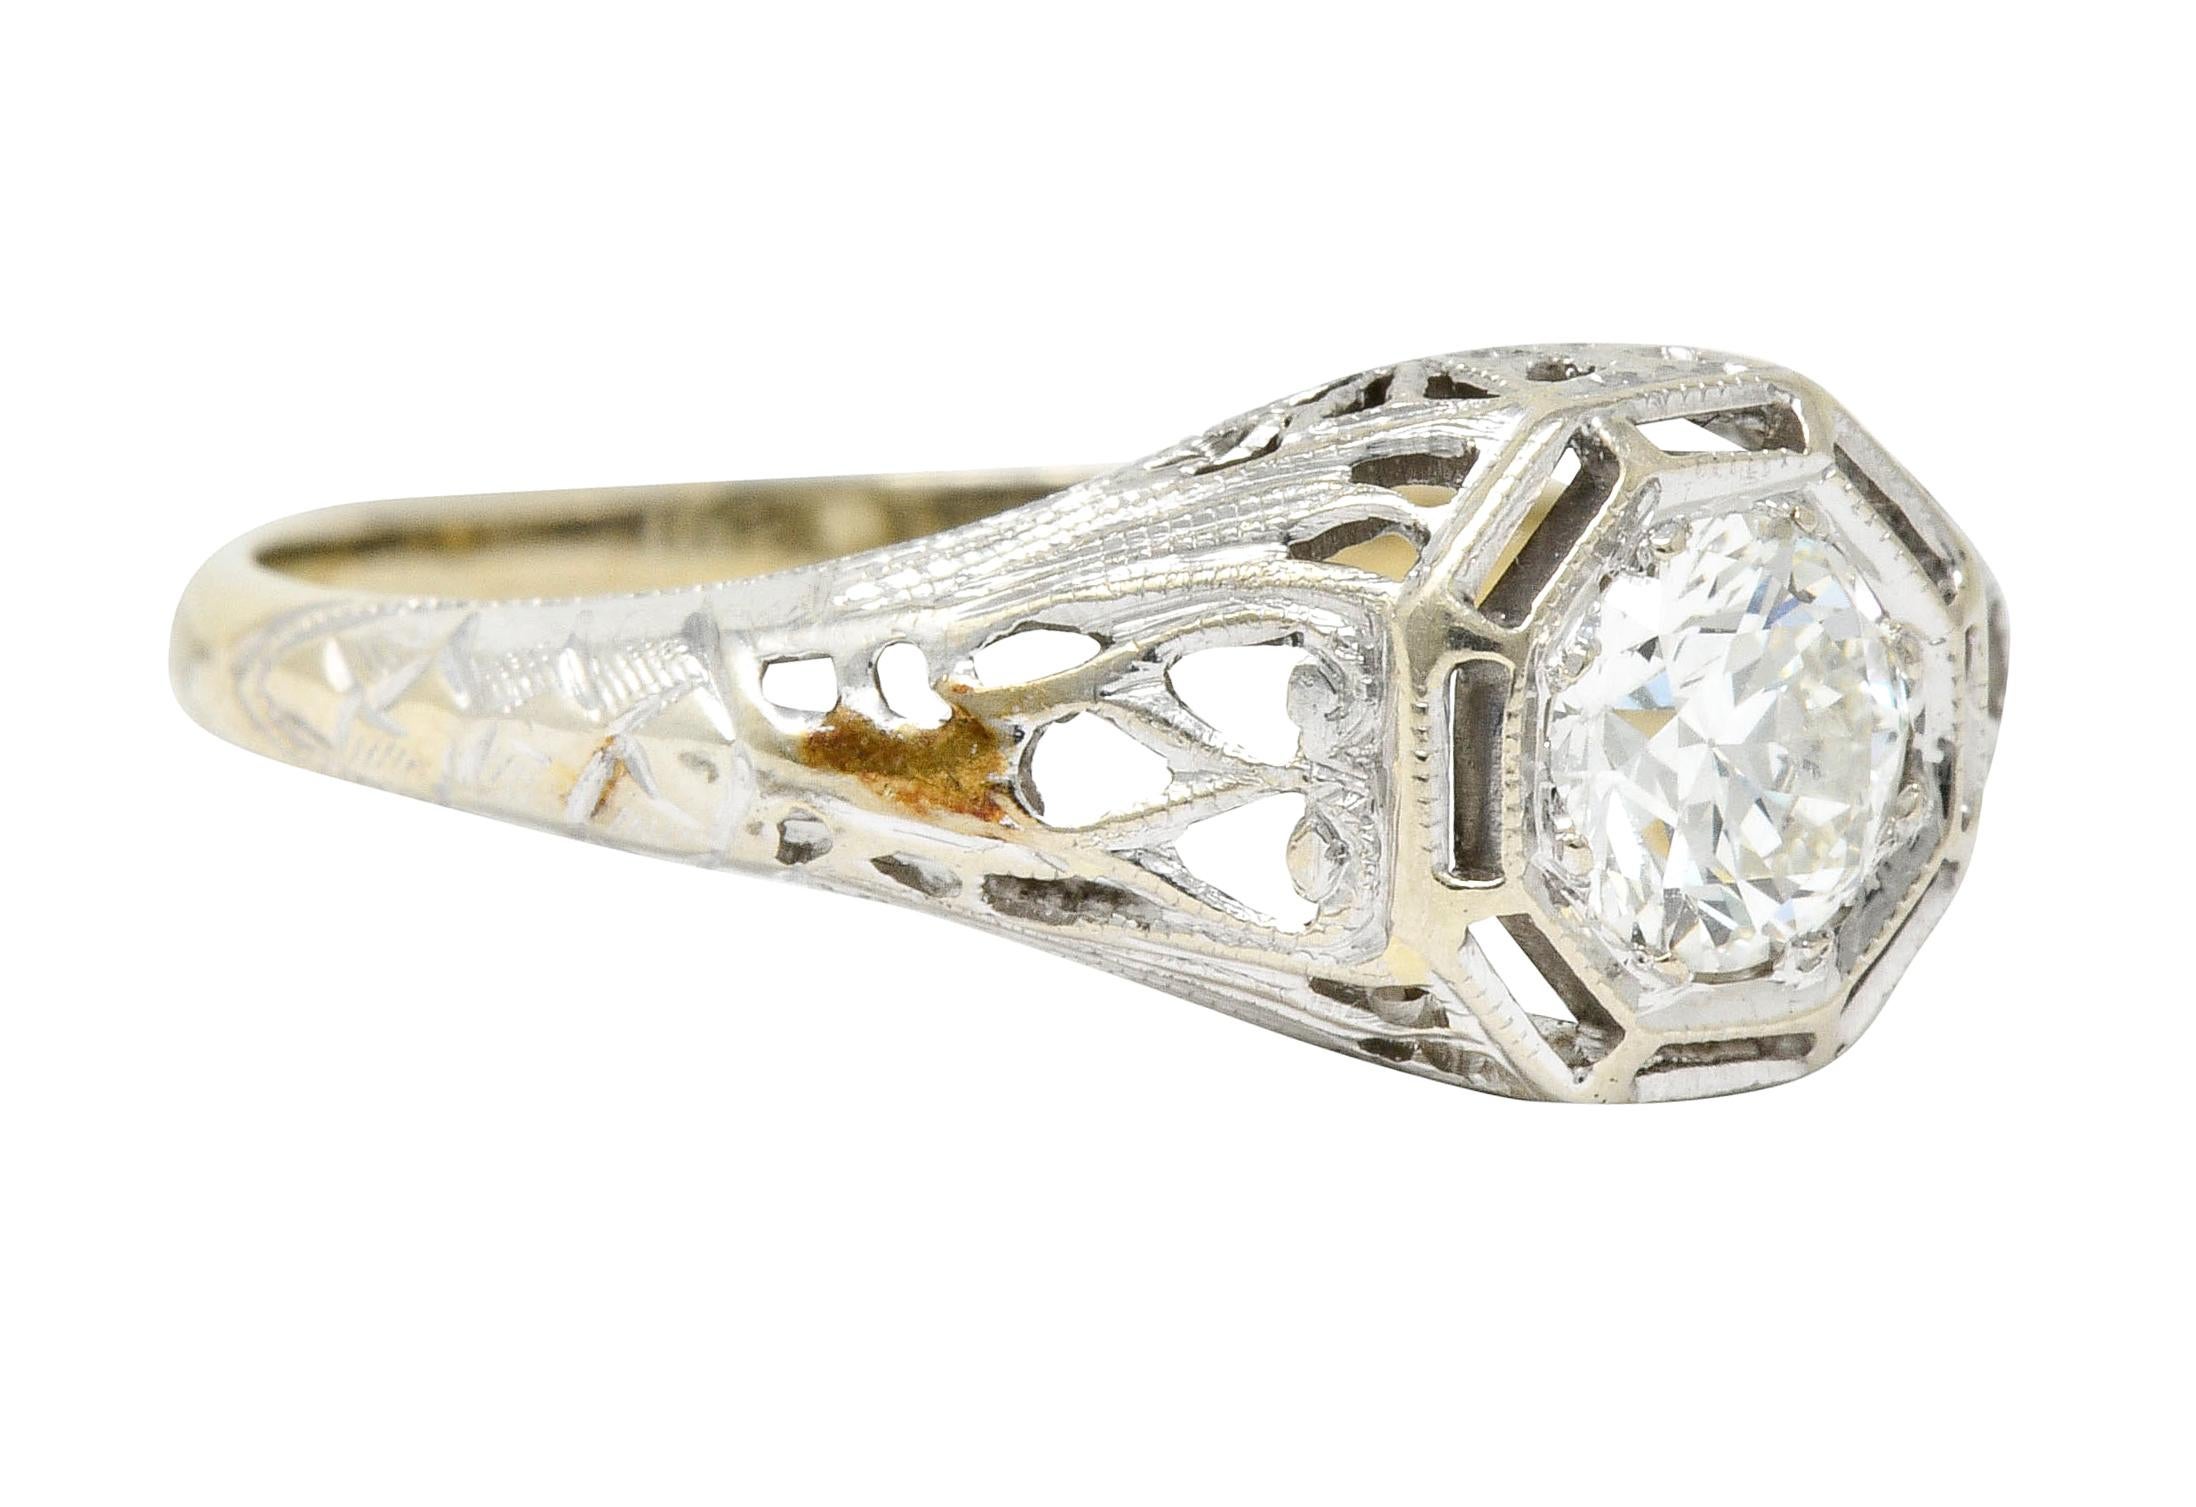 Centering an old European cut diamond weighing approximately 0.61 carat, H color with  VS1 clarity

Set low in a hexagonal head of an intricately pierced mounting with engraved details

Tested as 18 karat gold

Circa: 1930s

Ring Size: 9 &